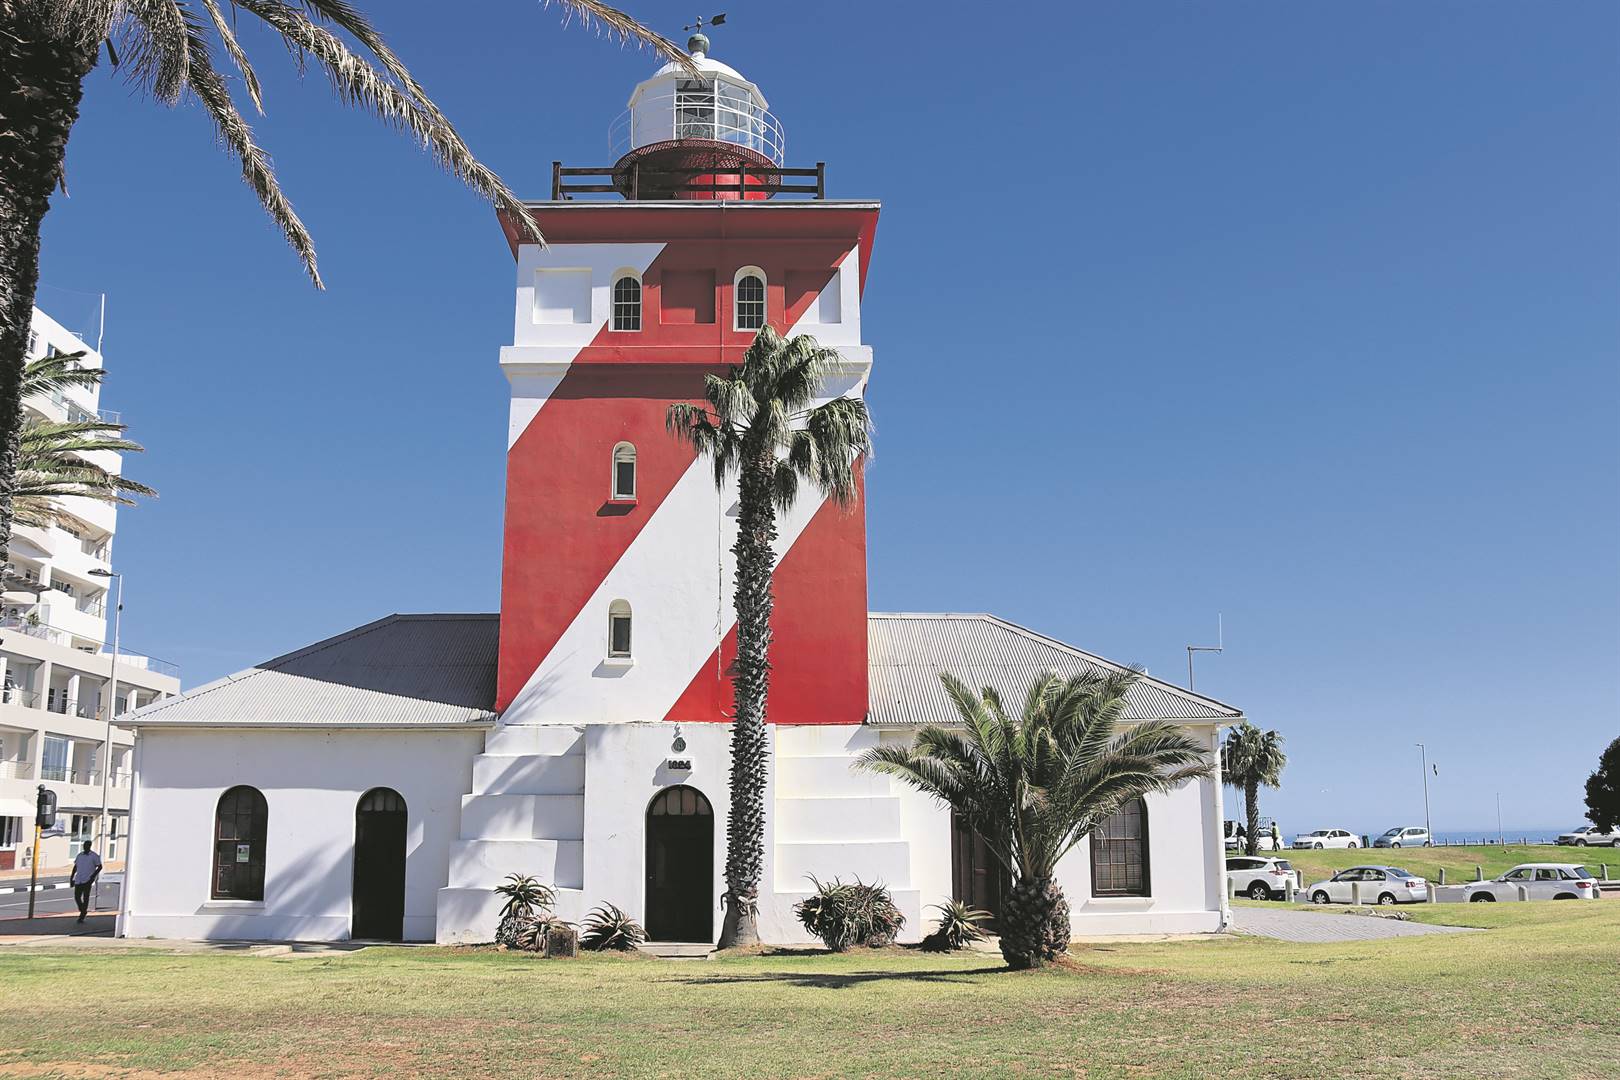 The Green Point Lighthouse range 25 nautical miles and this year marks 200 years since it was first lit. 